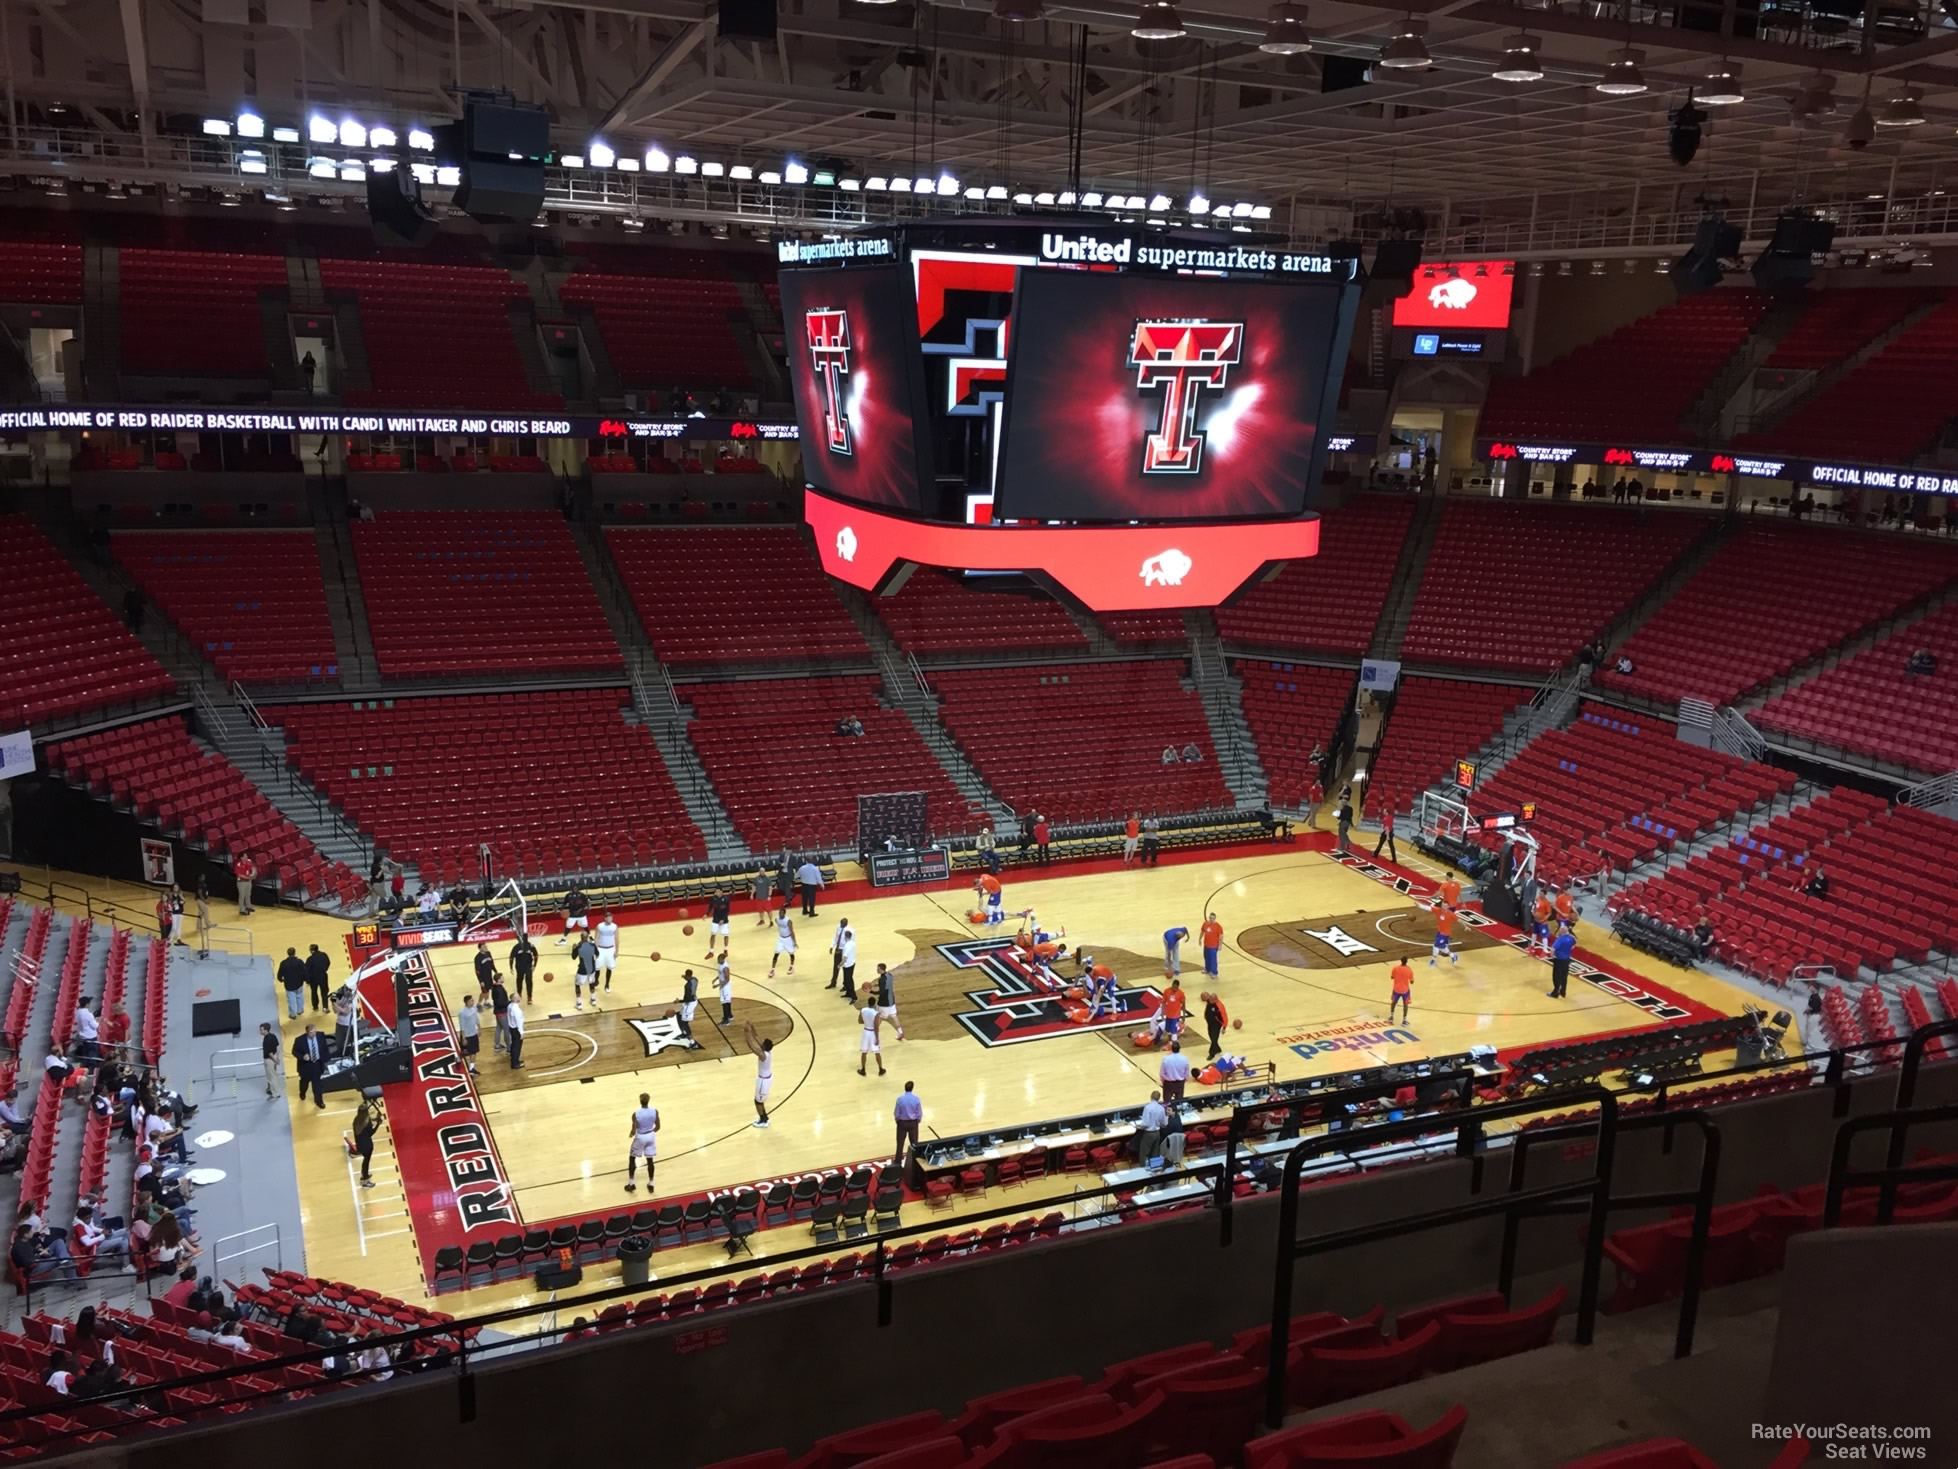 section 219, row 7 seat view  - united supermarkets arena